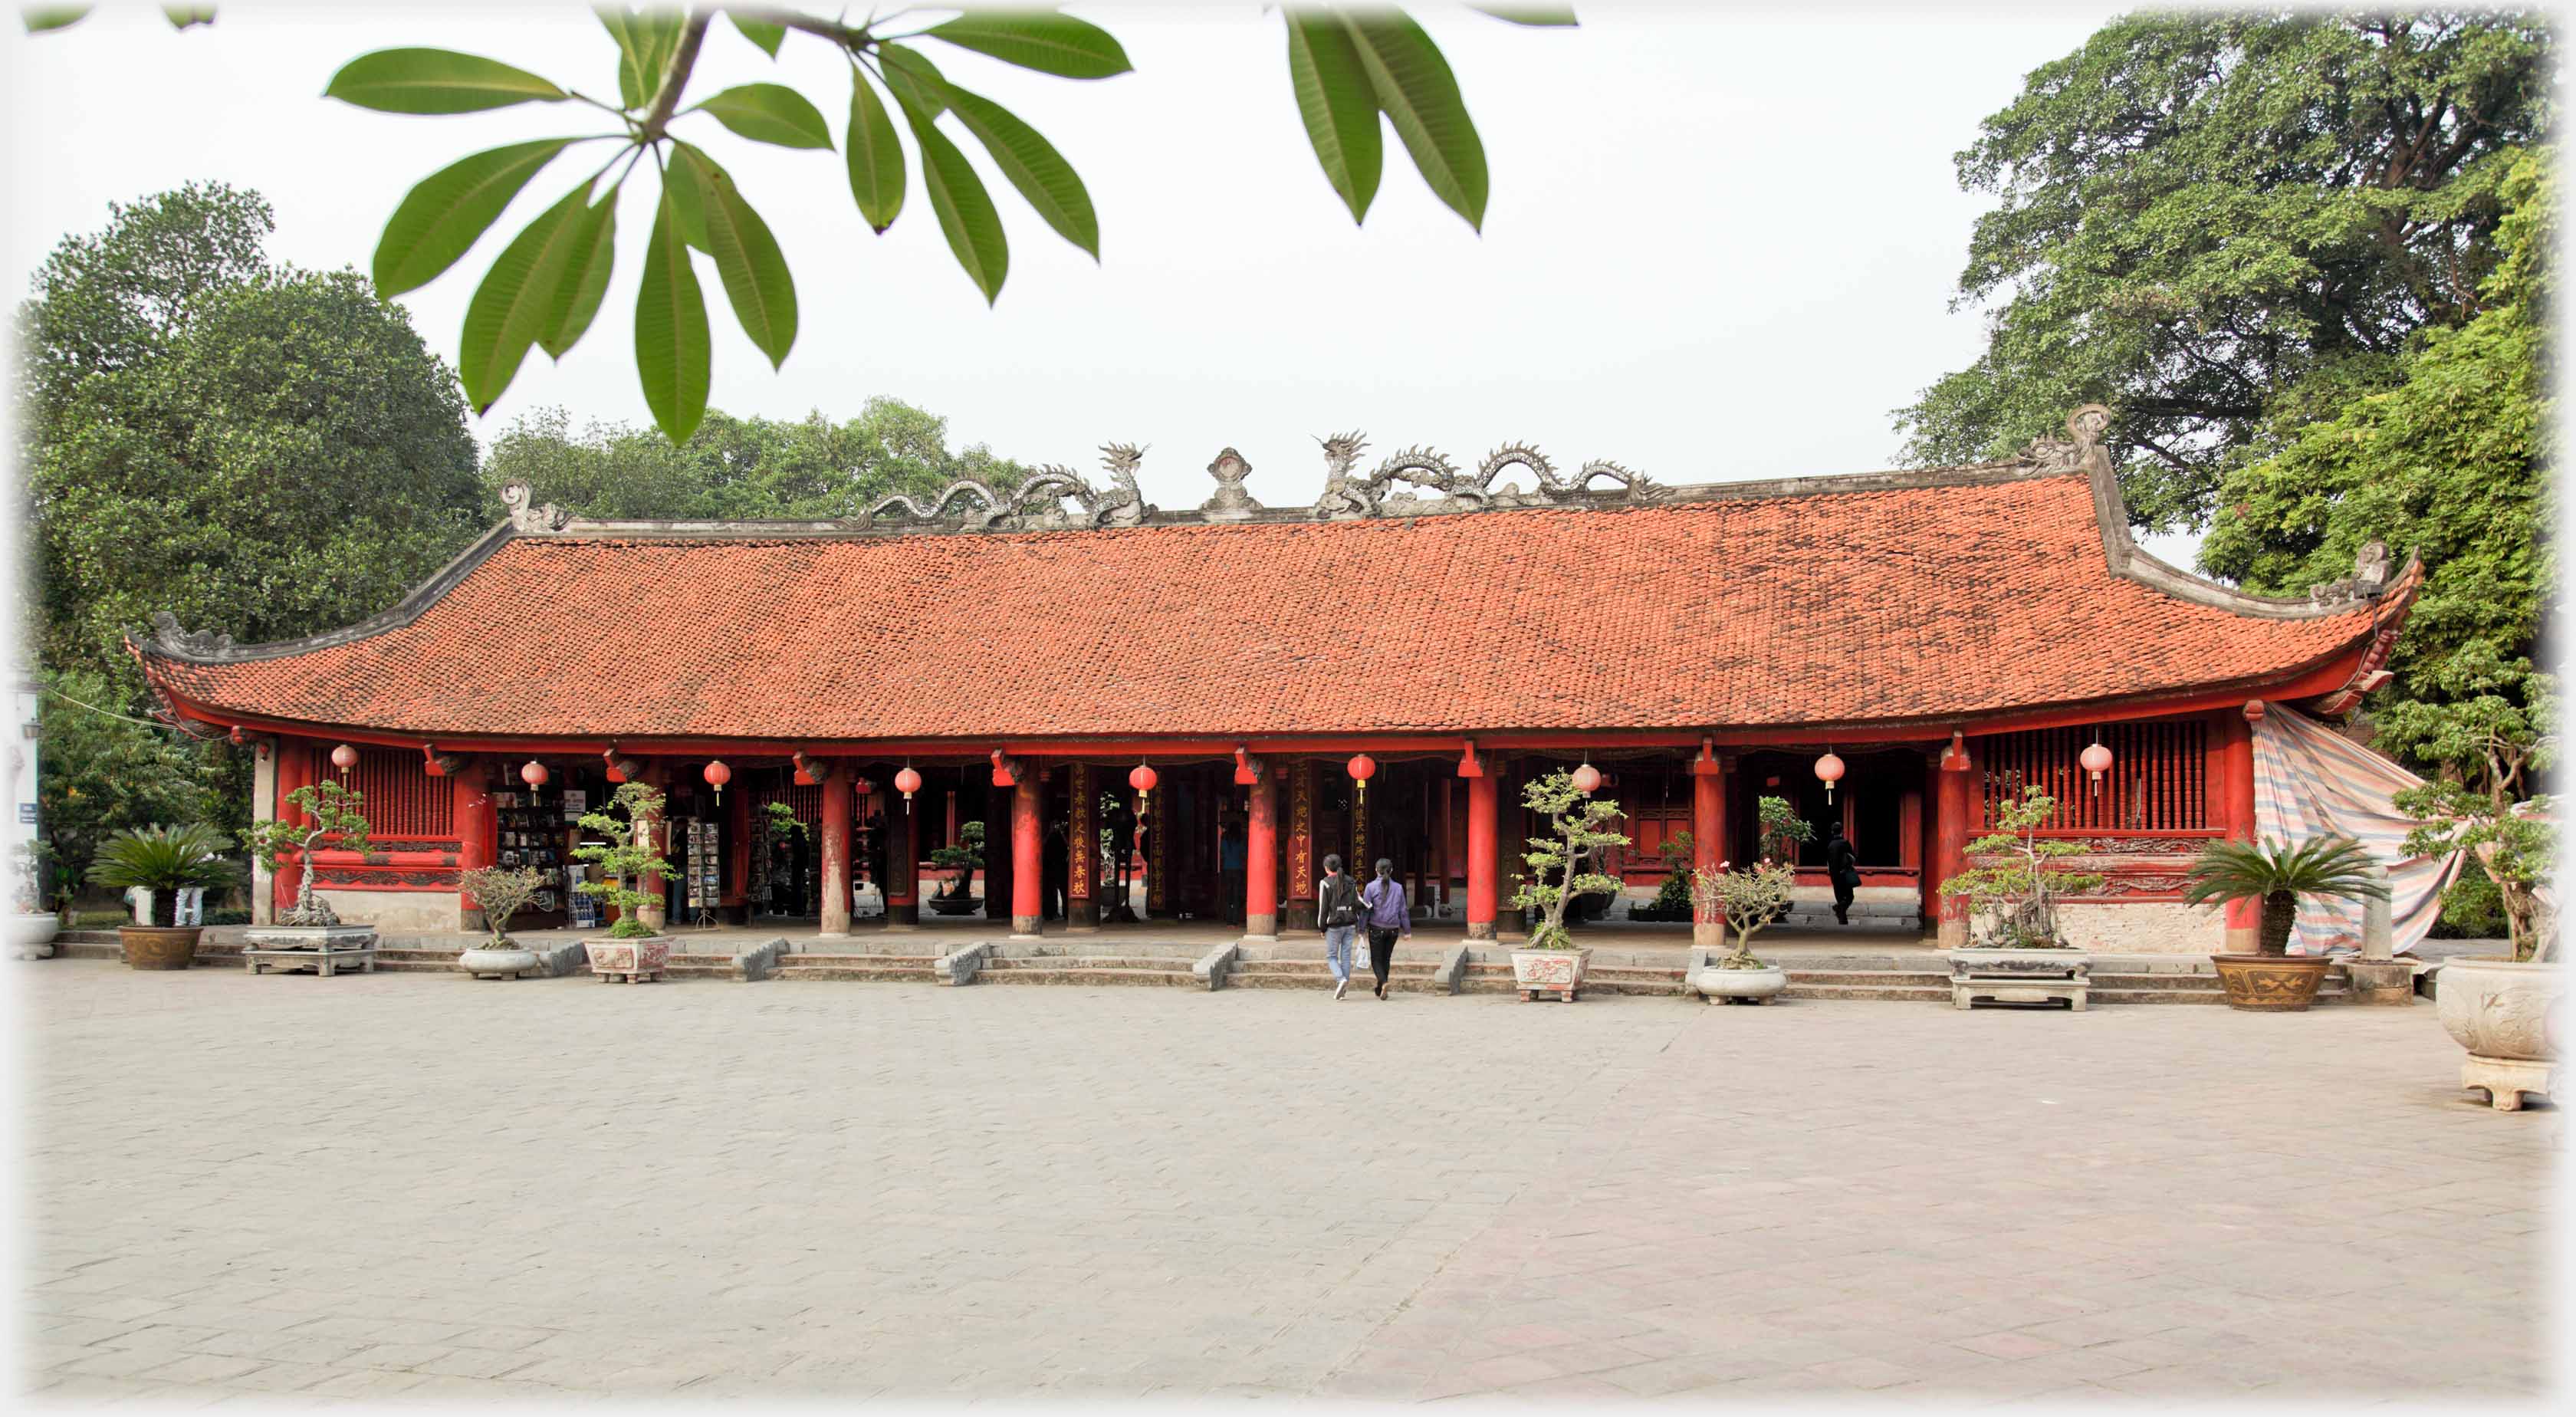 Long single story pavilion with red pillars and decorated roof.